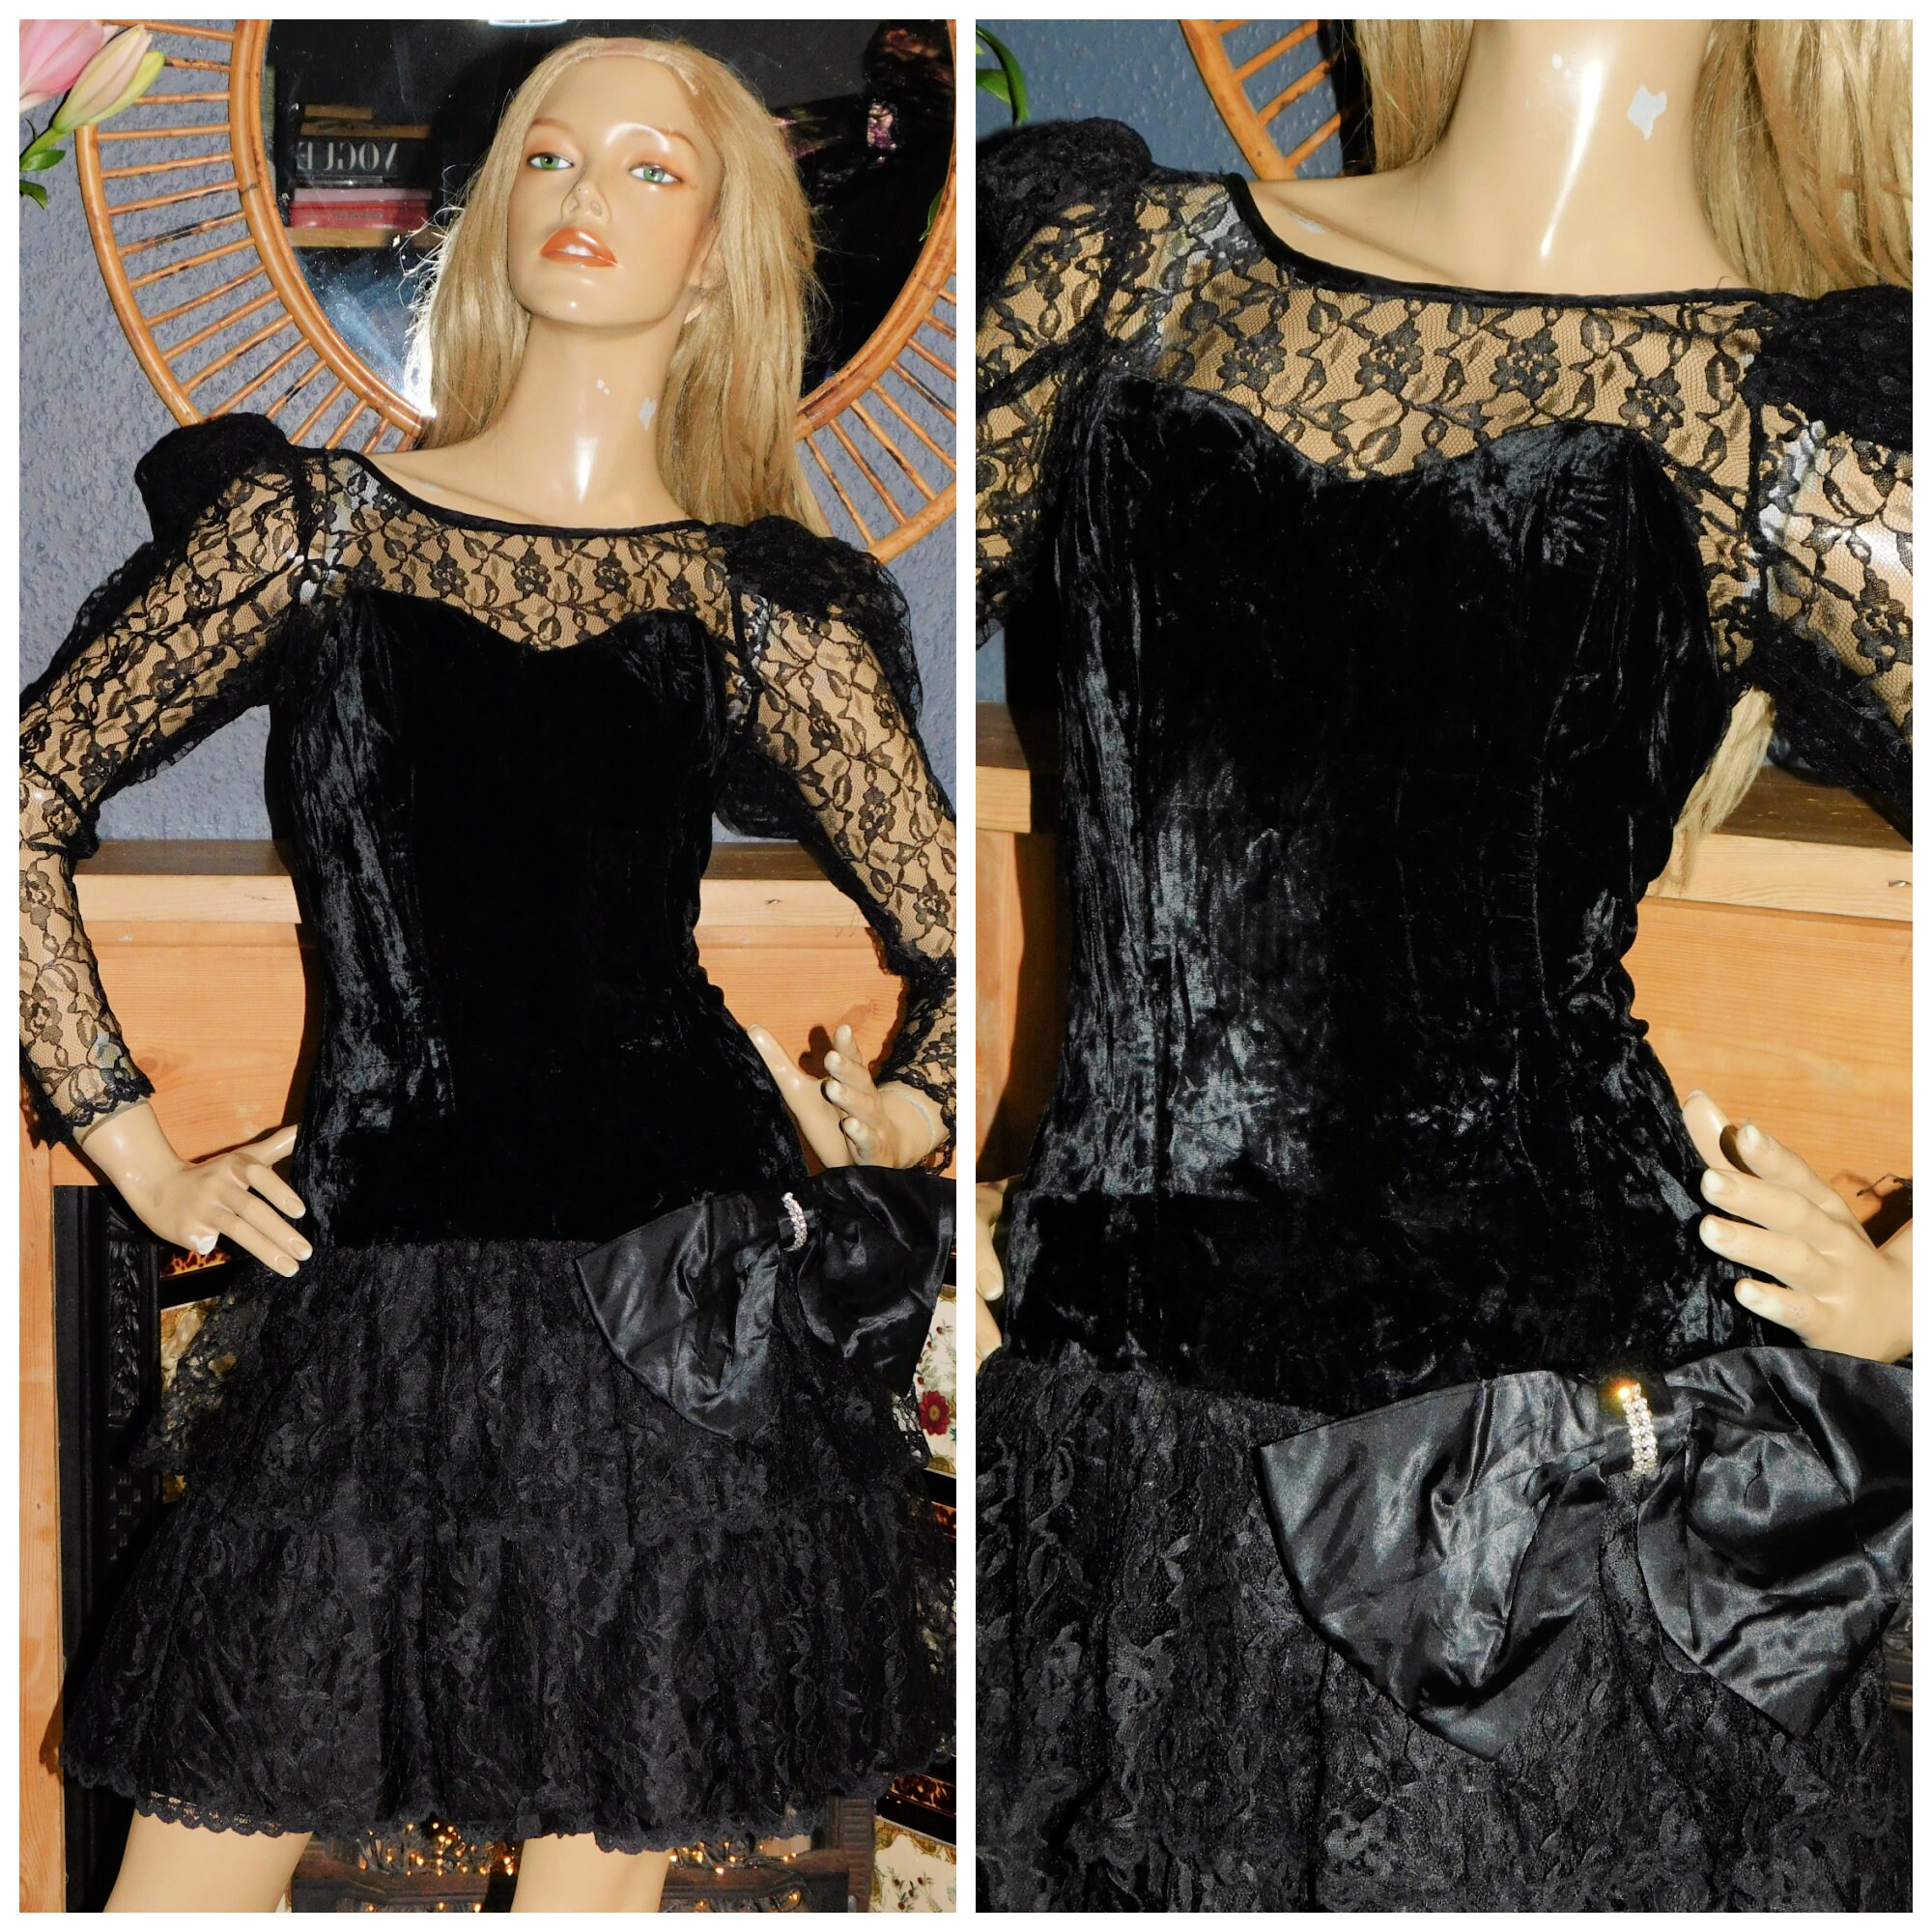 1980s Vintage Black Lace Fit & Flare Evening Prom Cocktail Party Dress  Medium 12 Layered Skirt Spaghetti Straps 80s Corset 